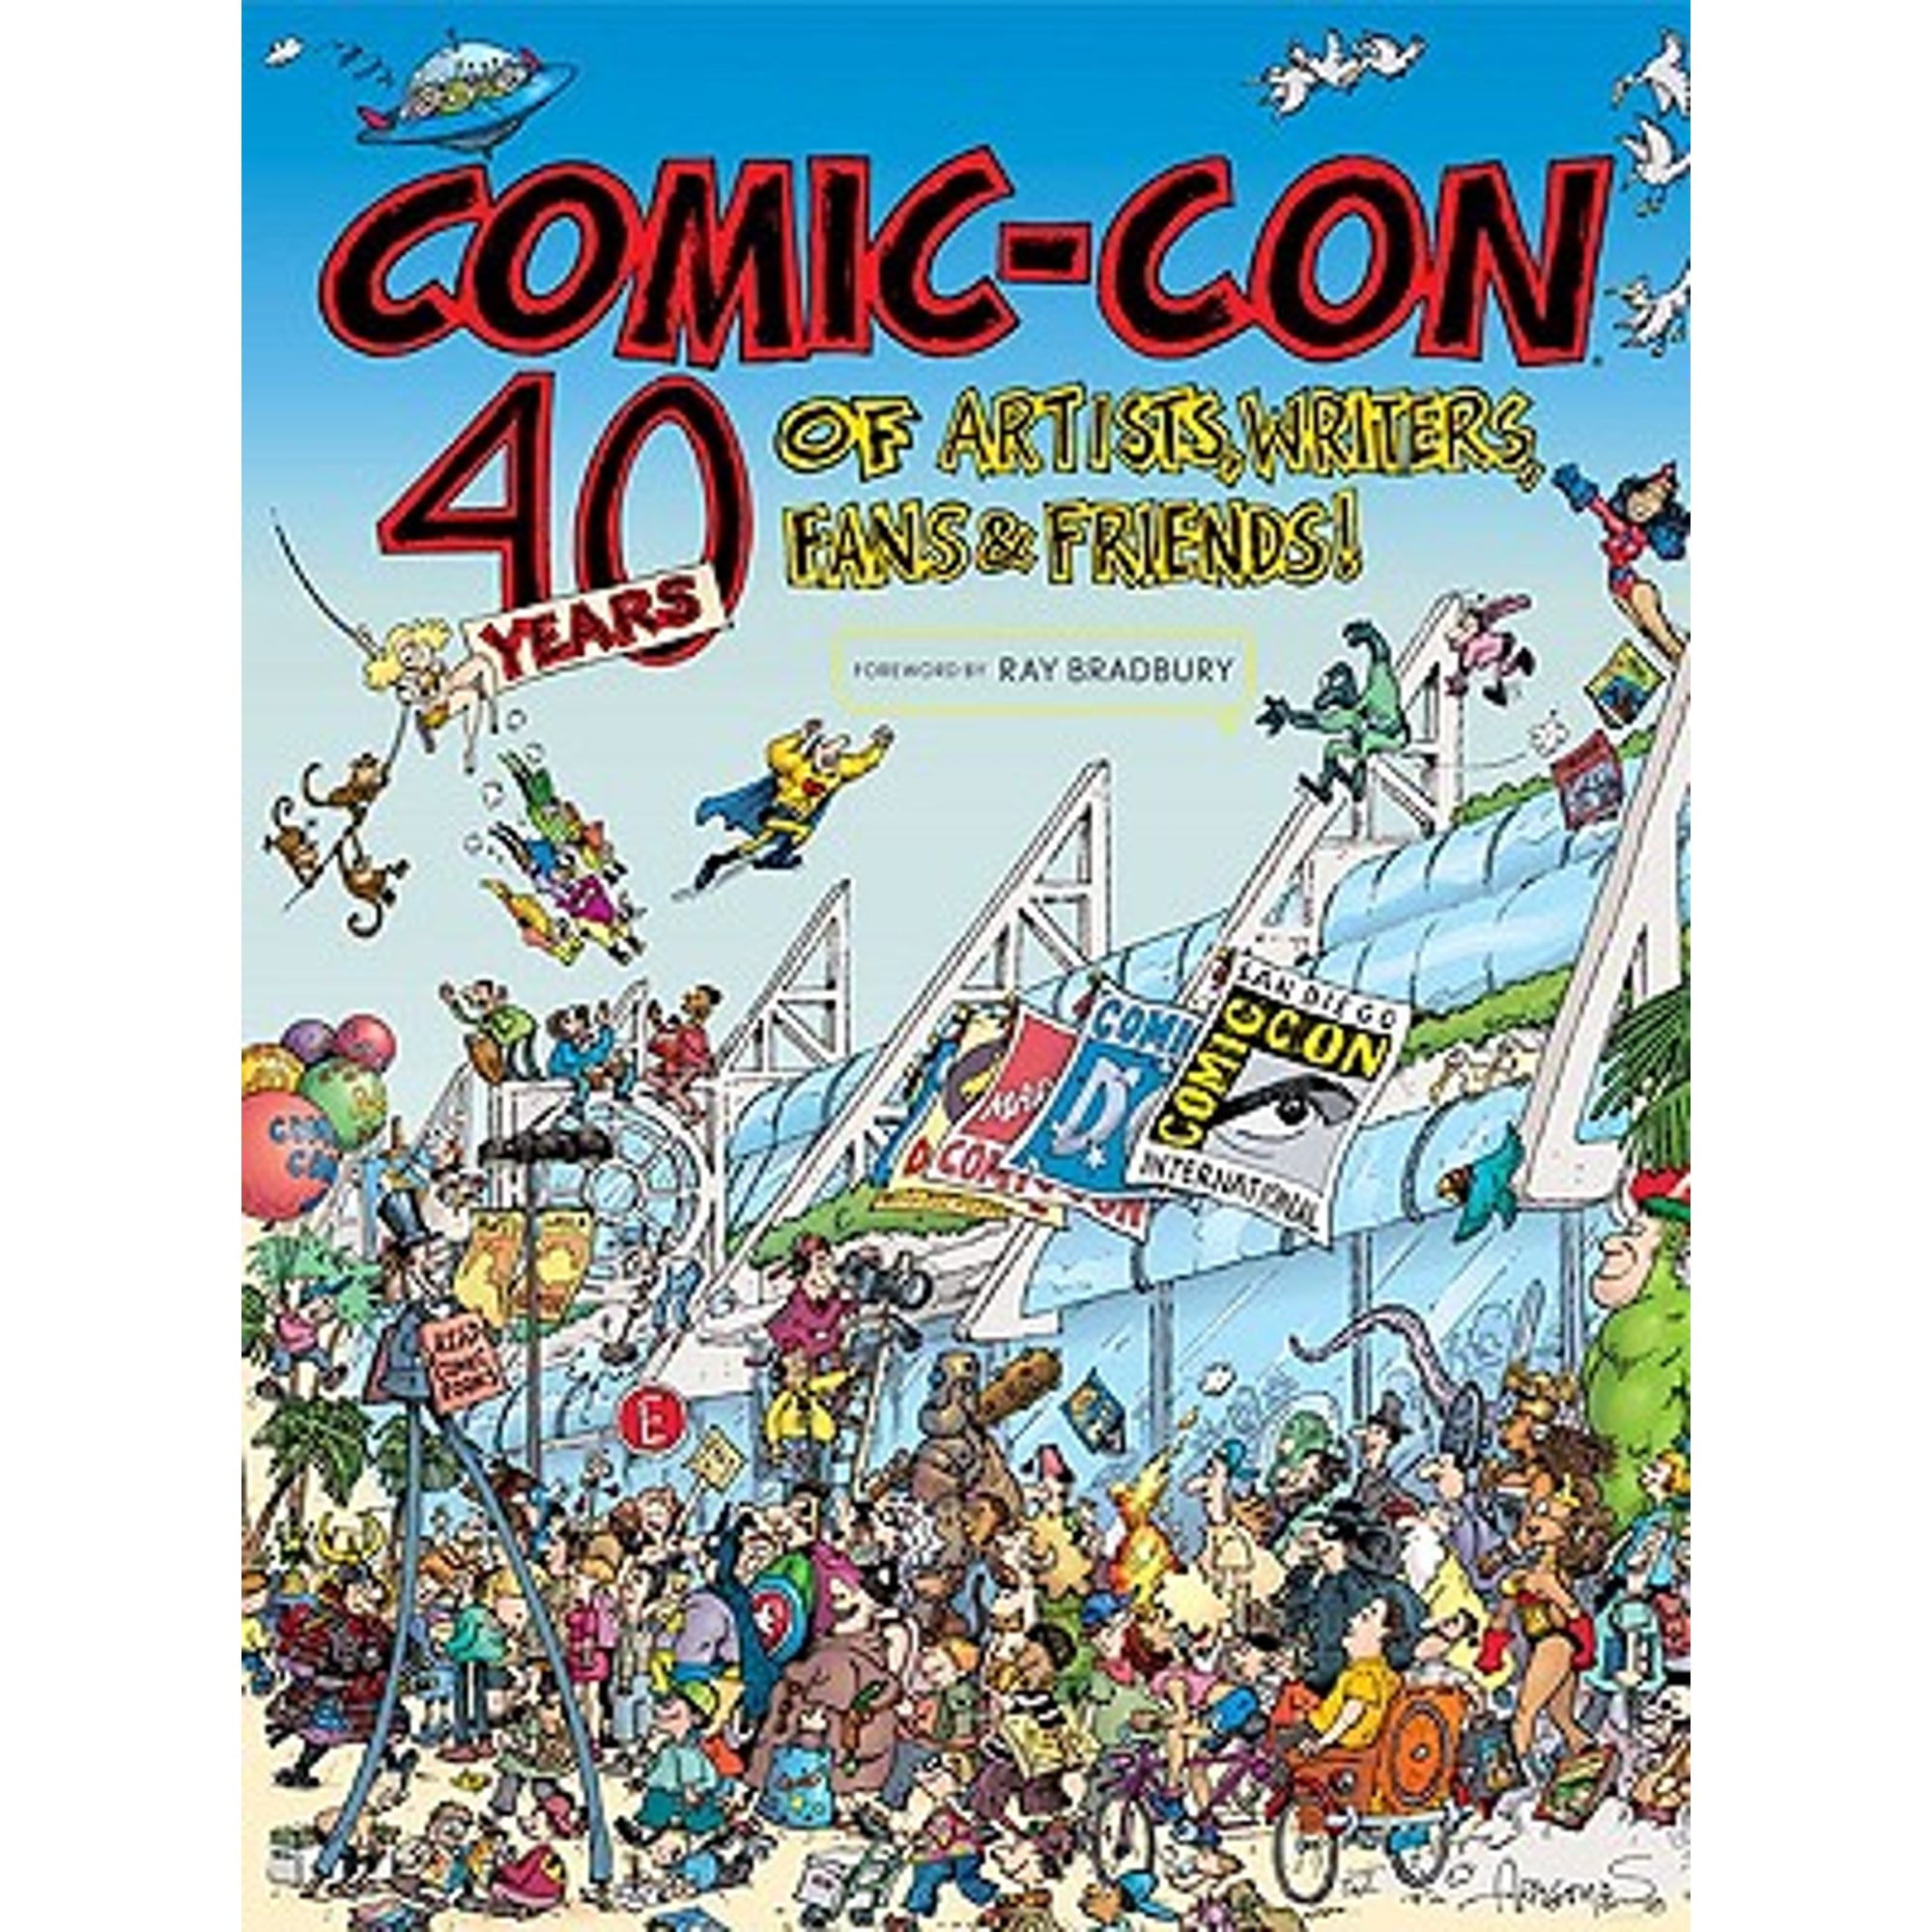 Pre-Owned Comic-Con: 40 Years of Artists, Writers, Fans & Friends (Hardcover 9780811867108) by Ray D Bradbury